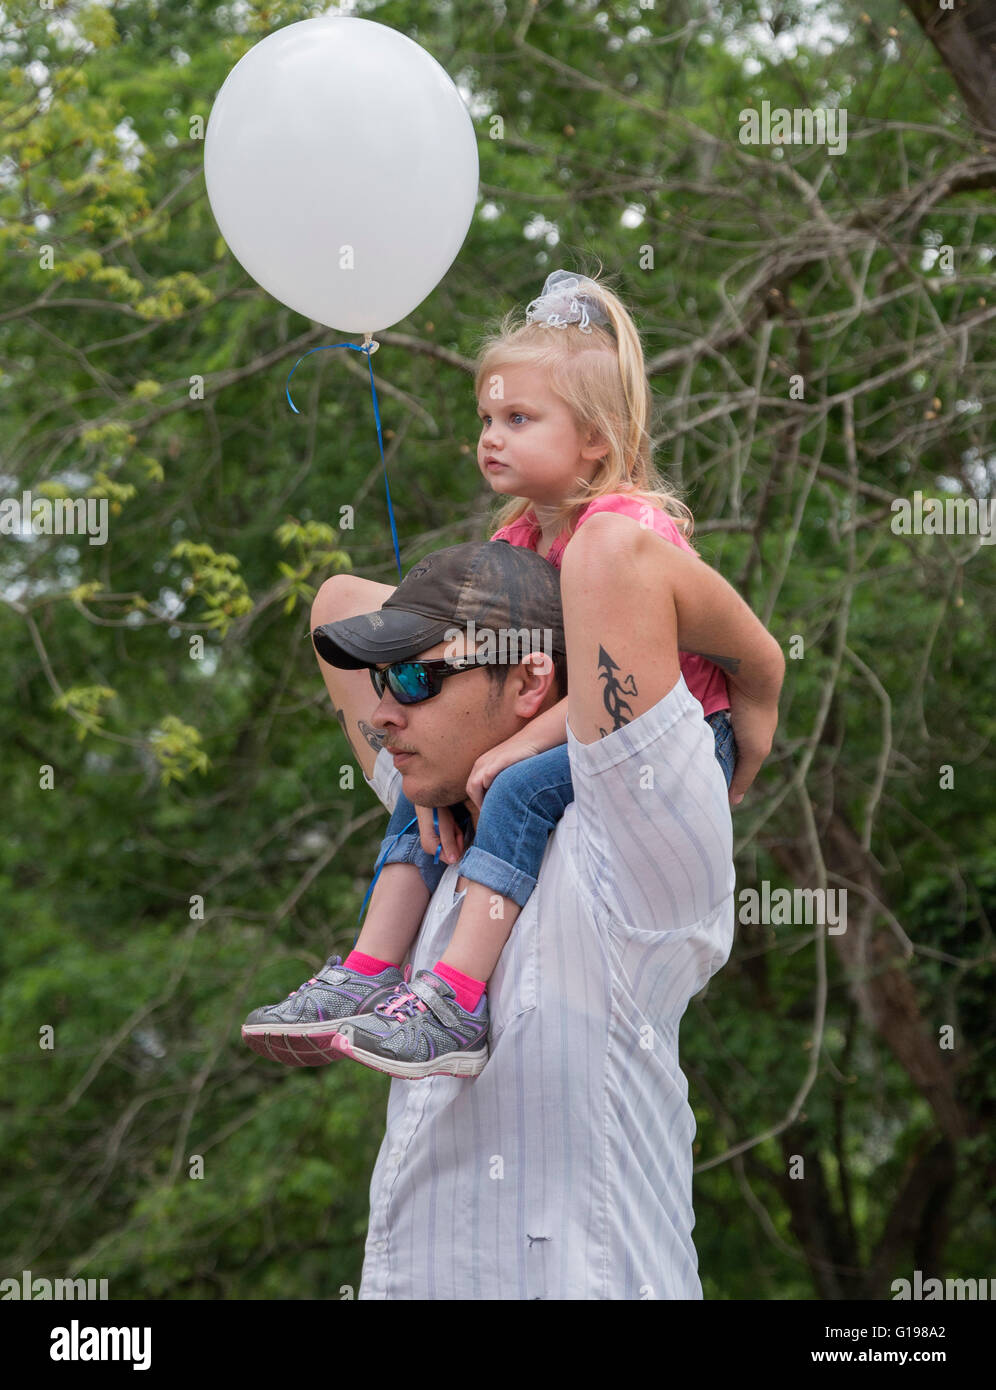 Pioneer Days annual celebration in High Springs Florida. Dad gives a ride to his daughter. Stock Photo